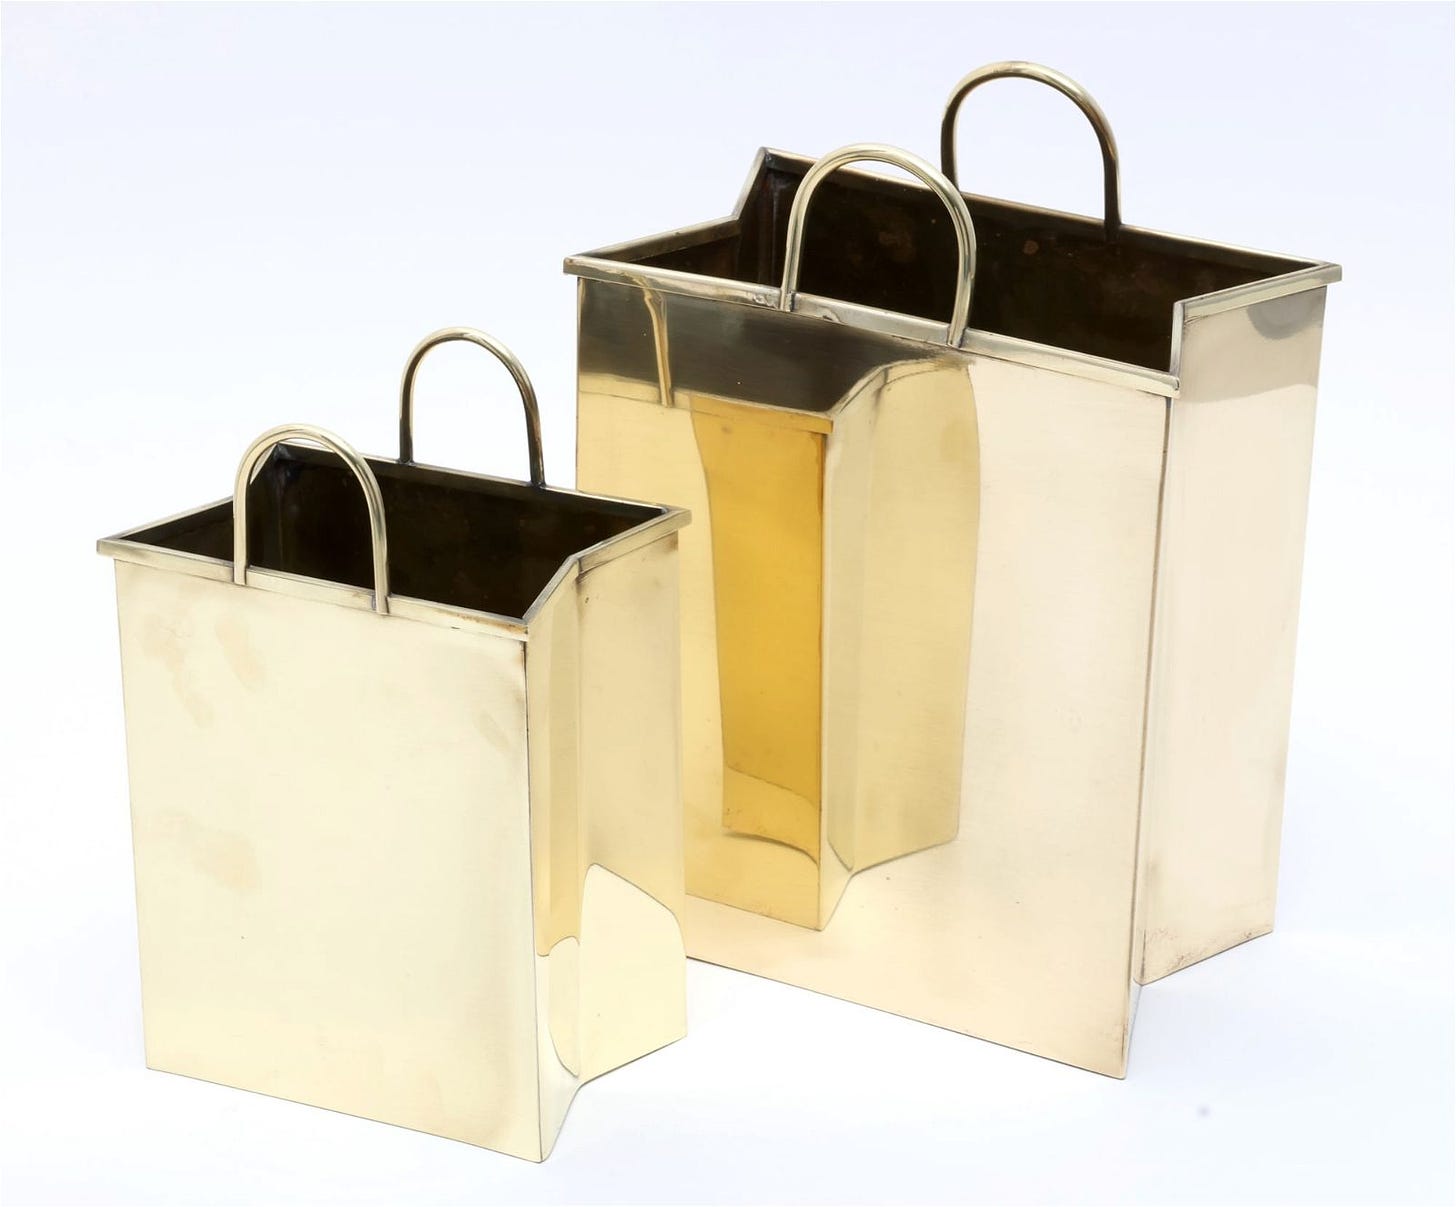 Gio Ponti Brass Baskets Made In Italy.